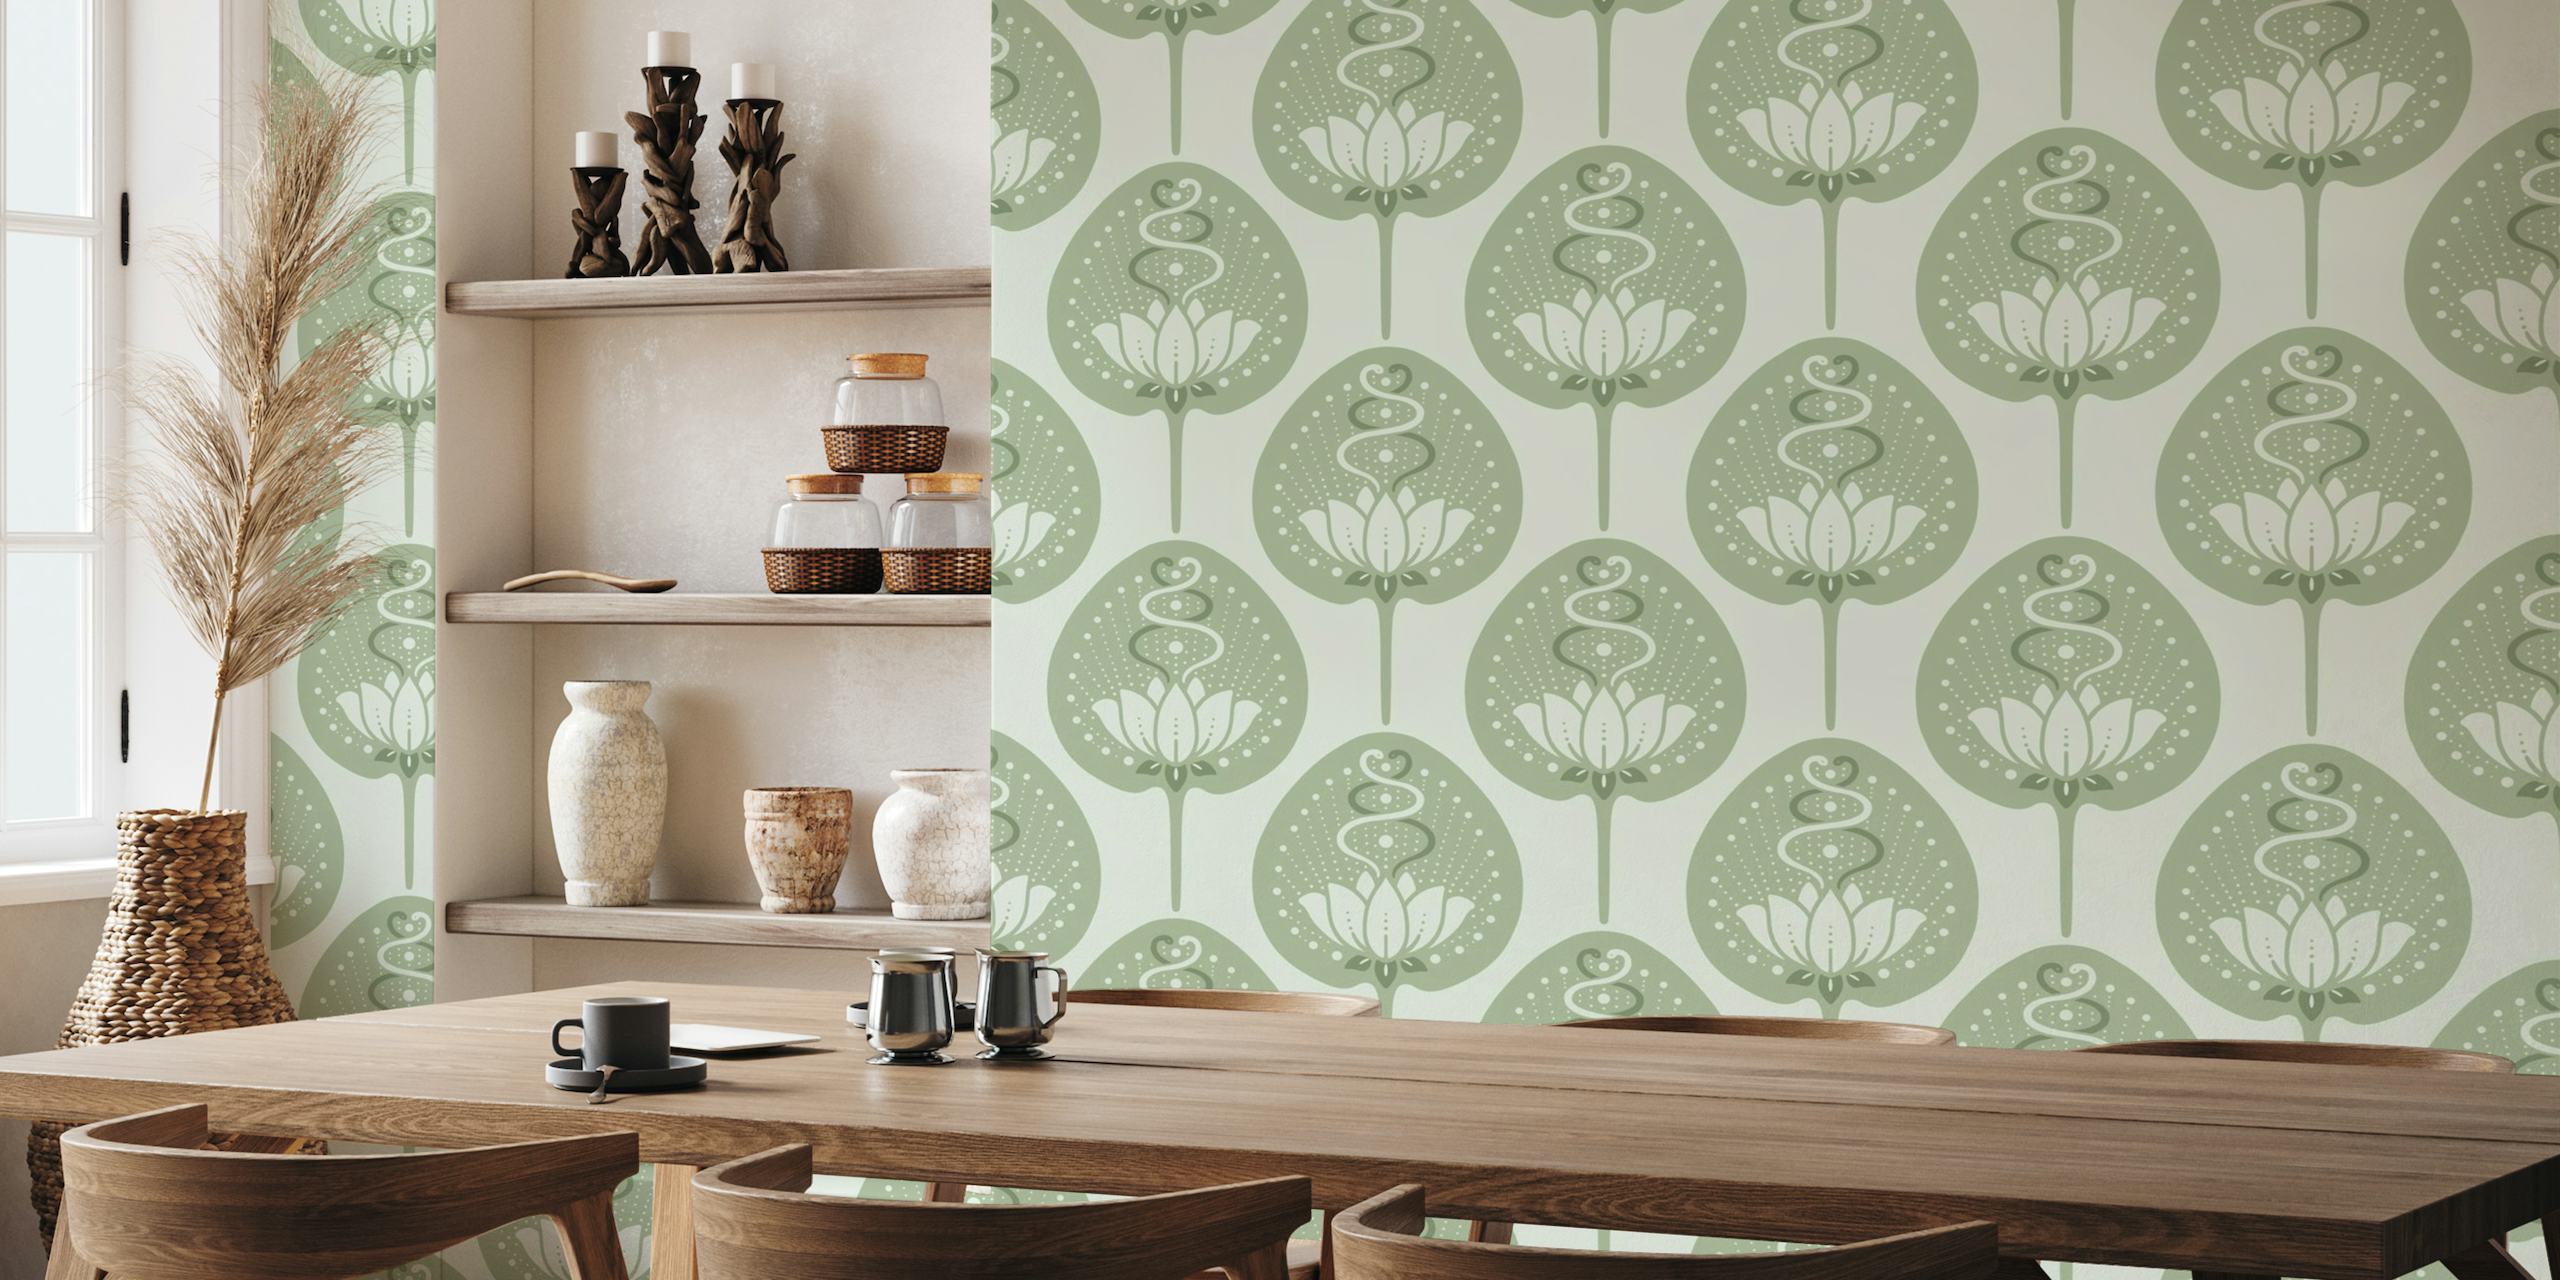 Lotus with Snakes - Sage Green wallpaper